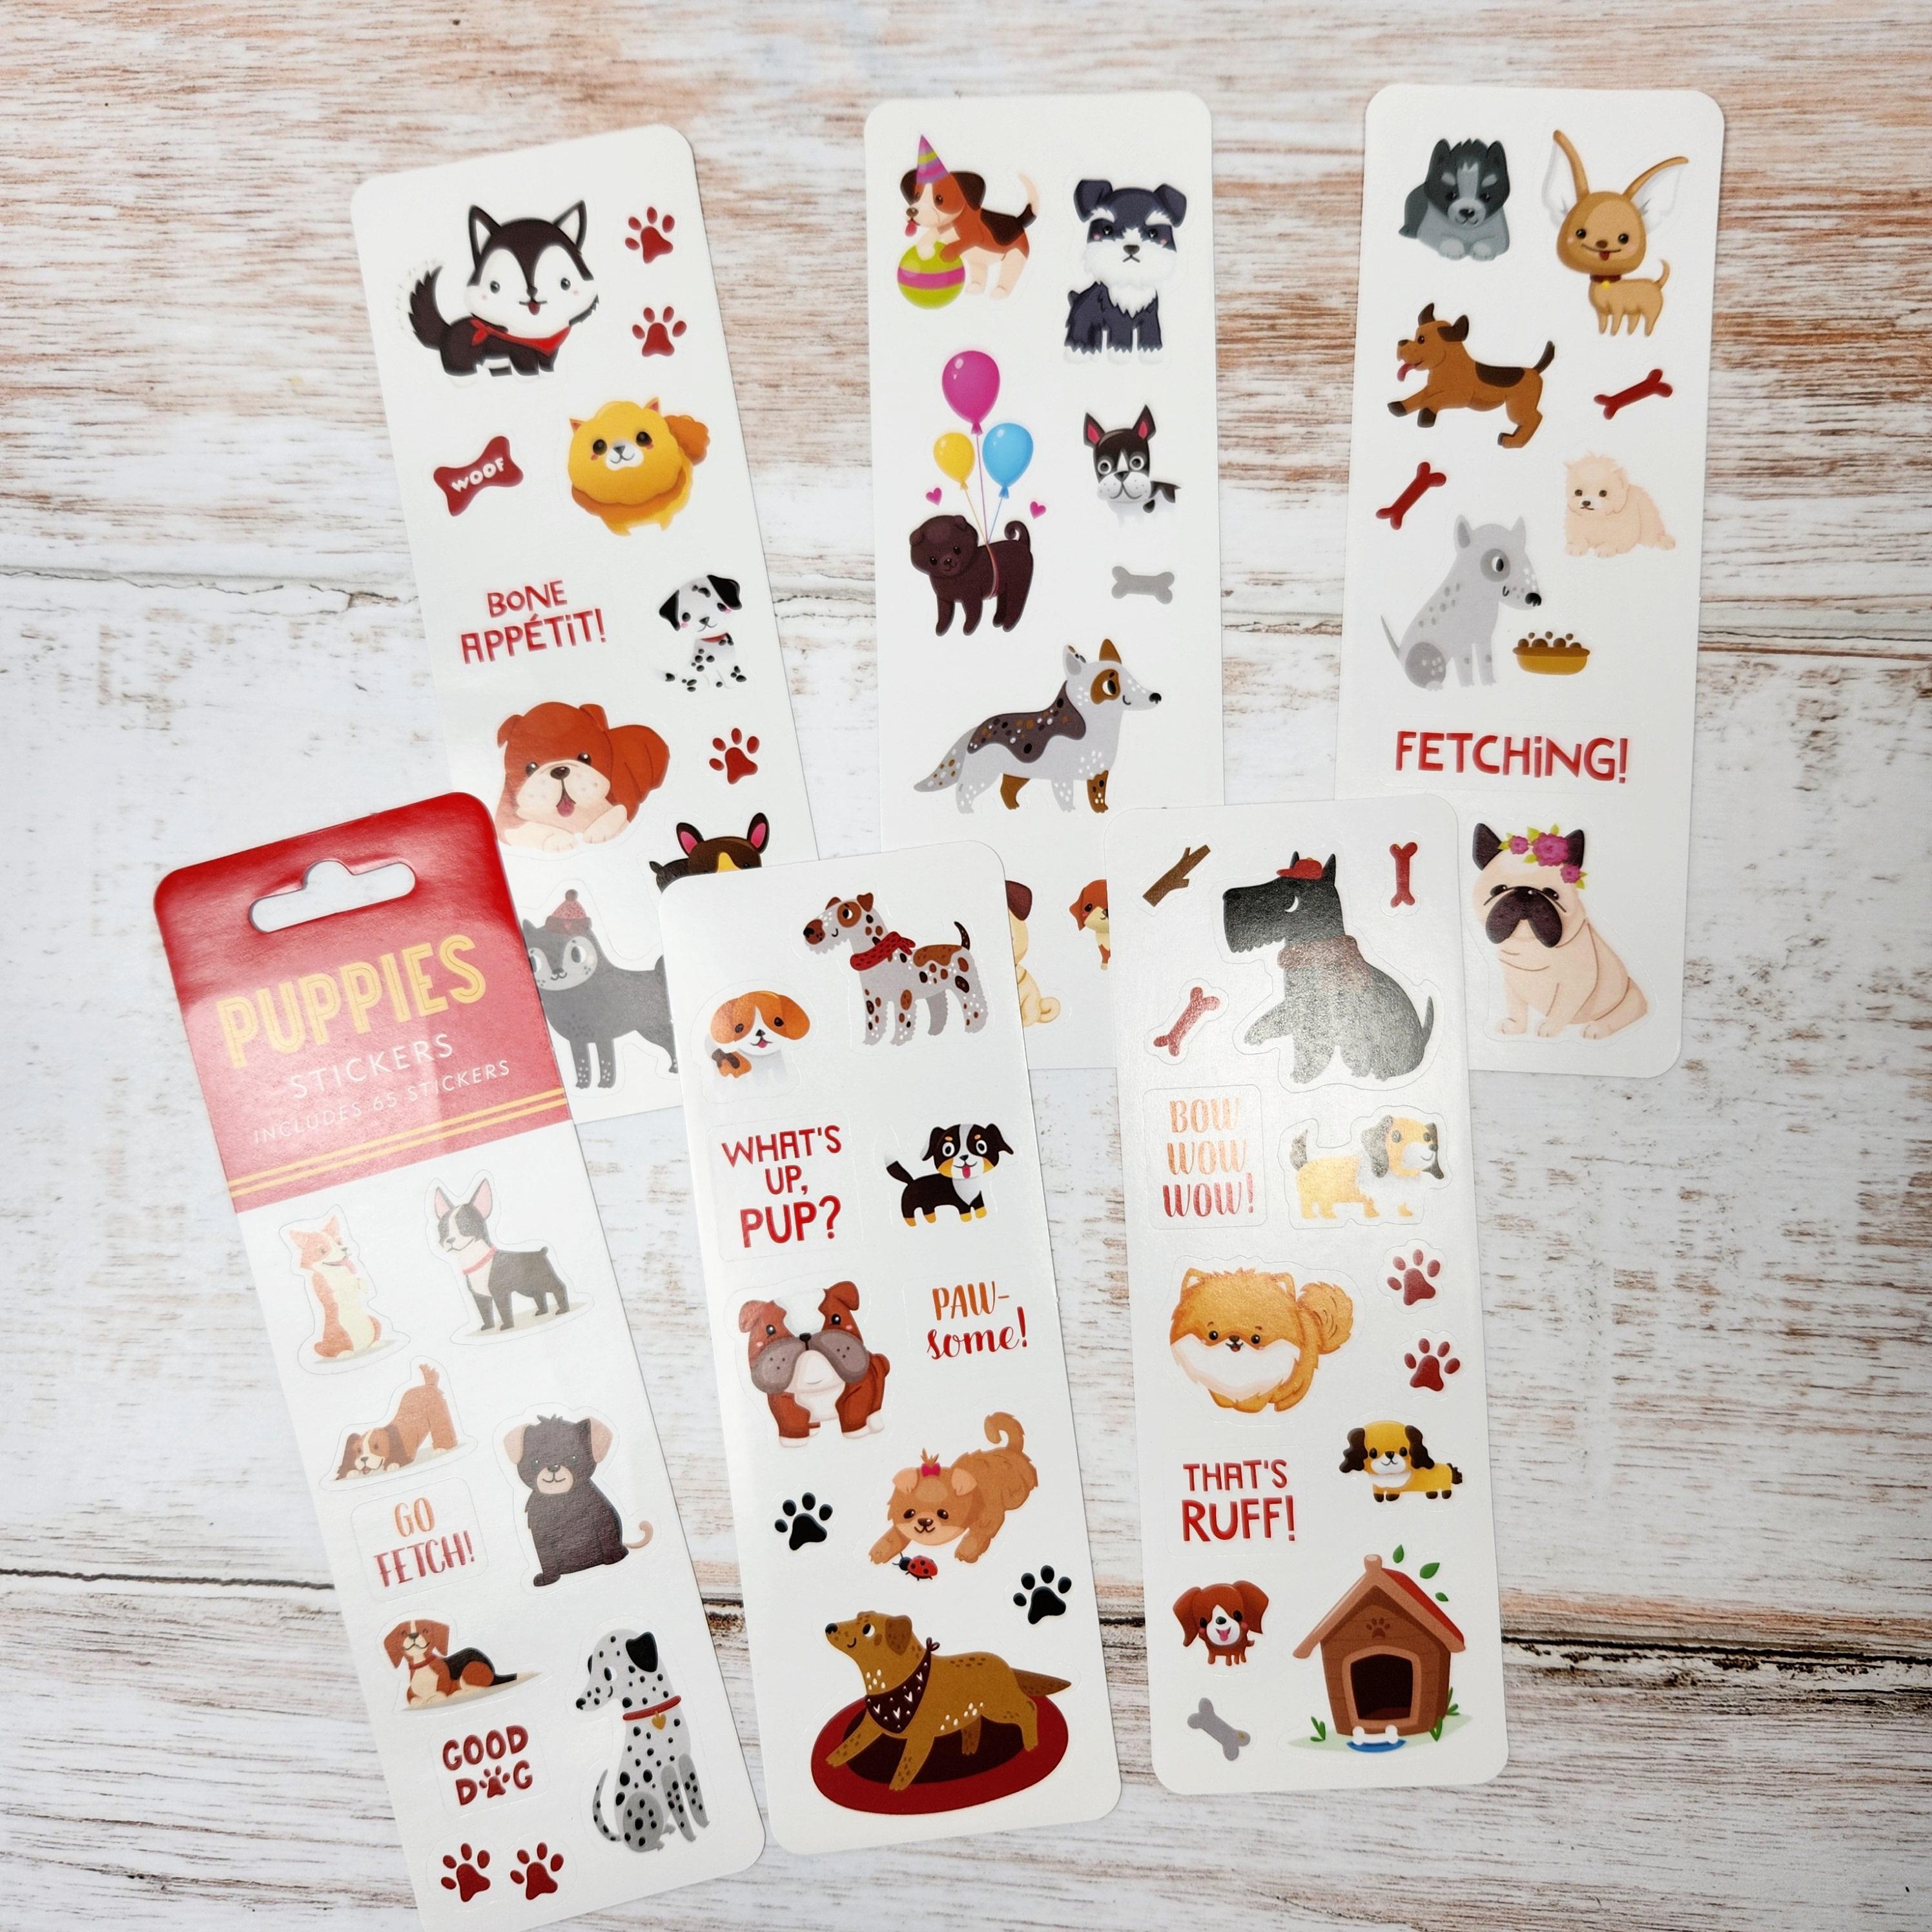 Peter Pauper Press Puppies Sticker Set 6 sheets with cute dogs and puppies- Paper Kooka Australia